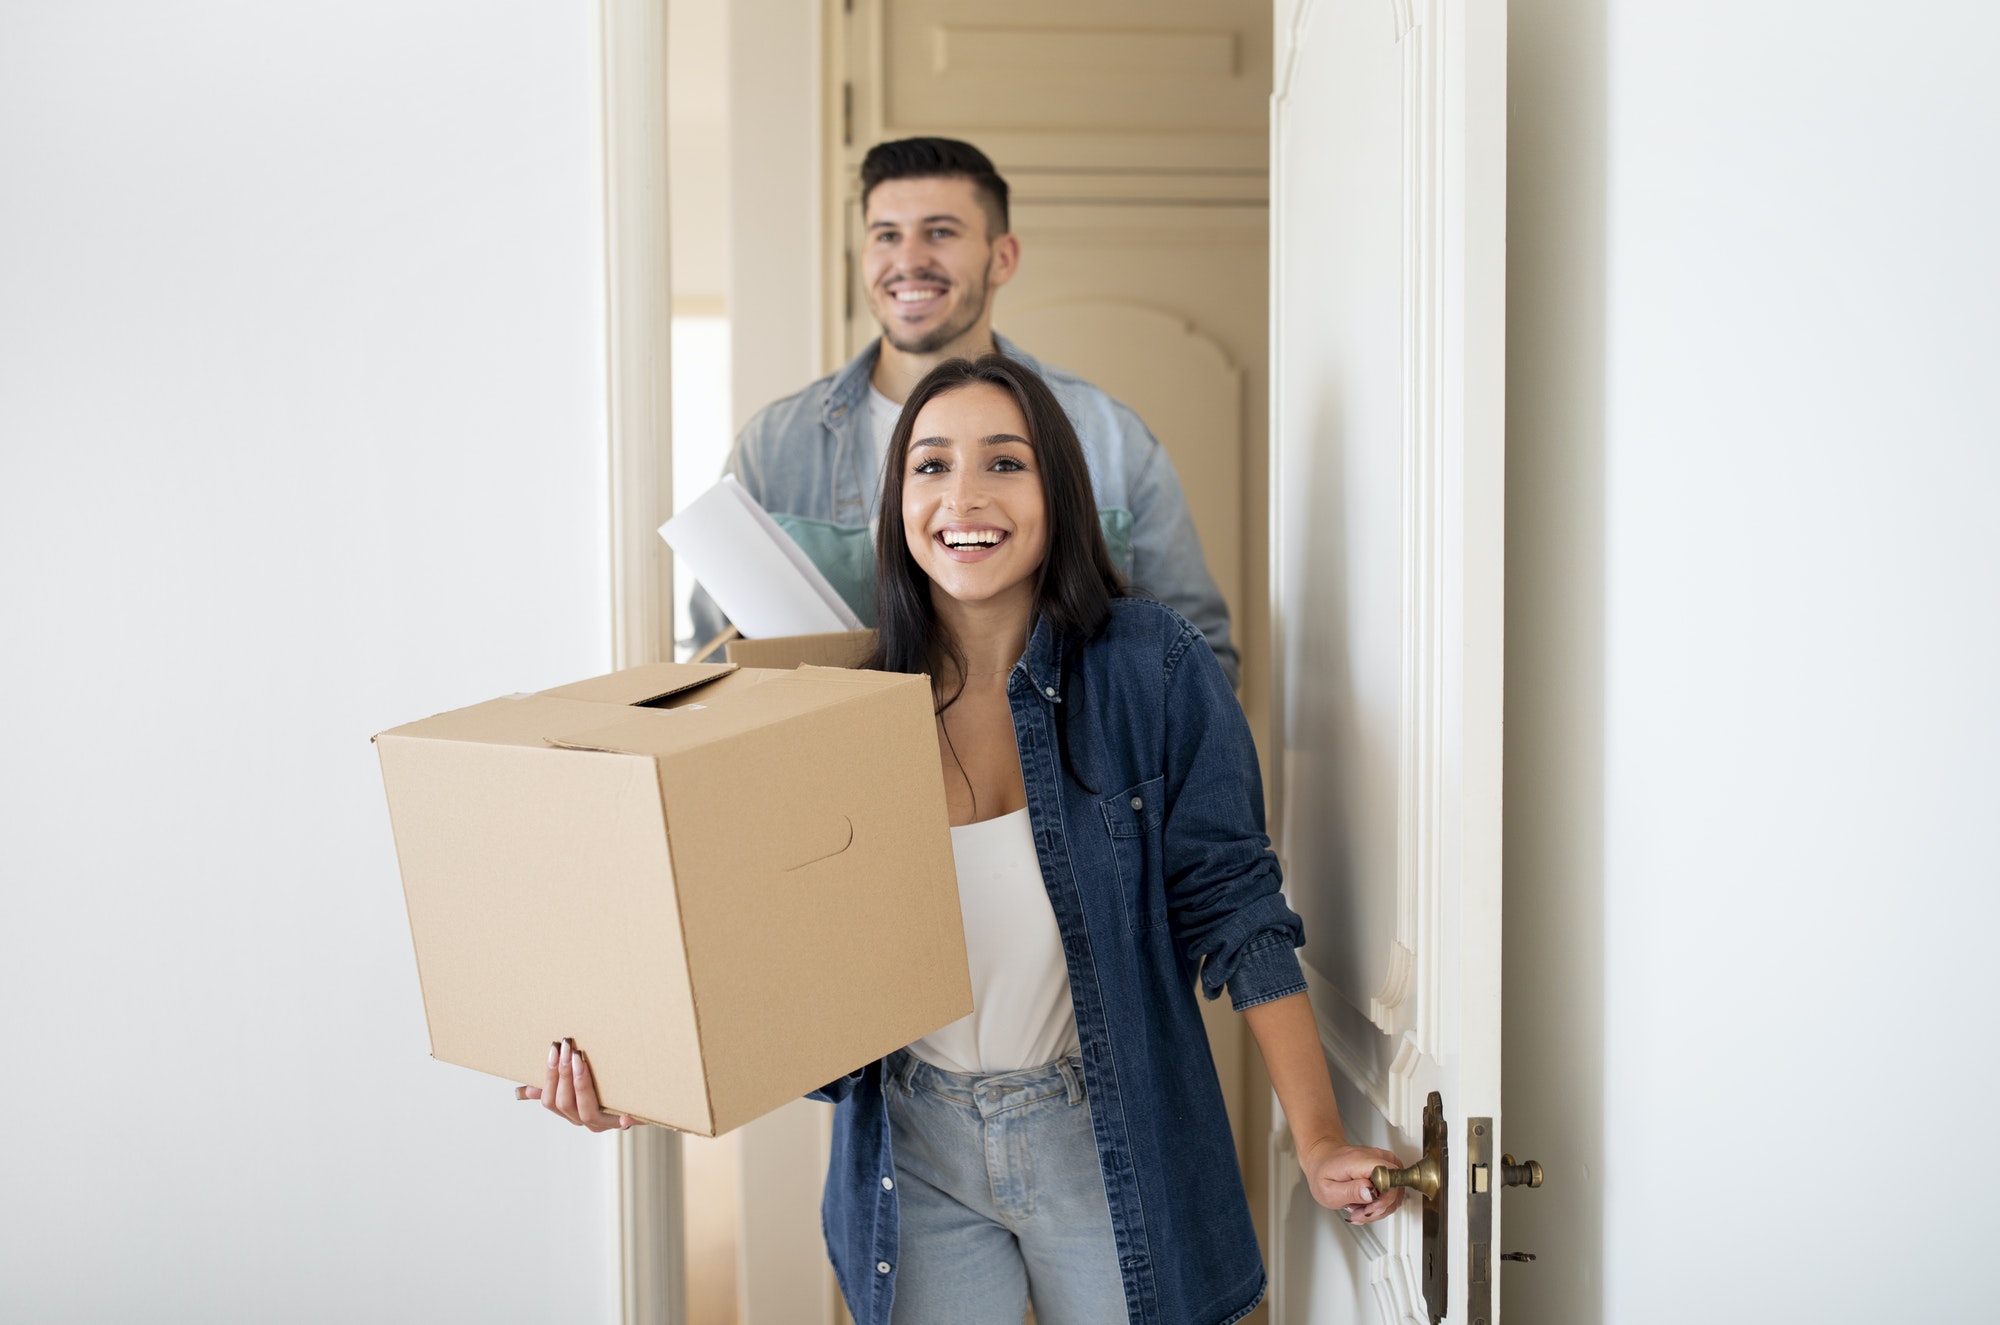 Young Happy Tenants Couple Entering Their New Home After Moving